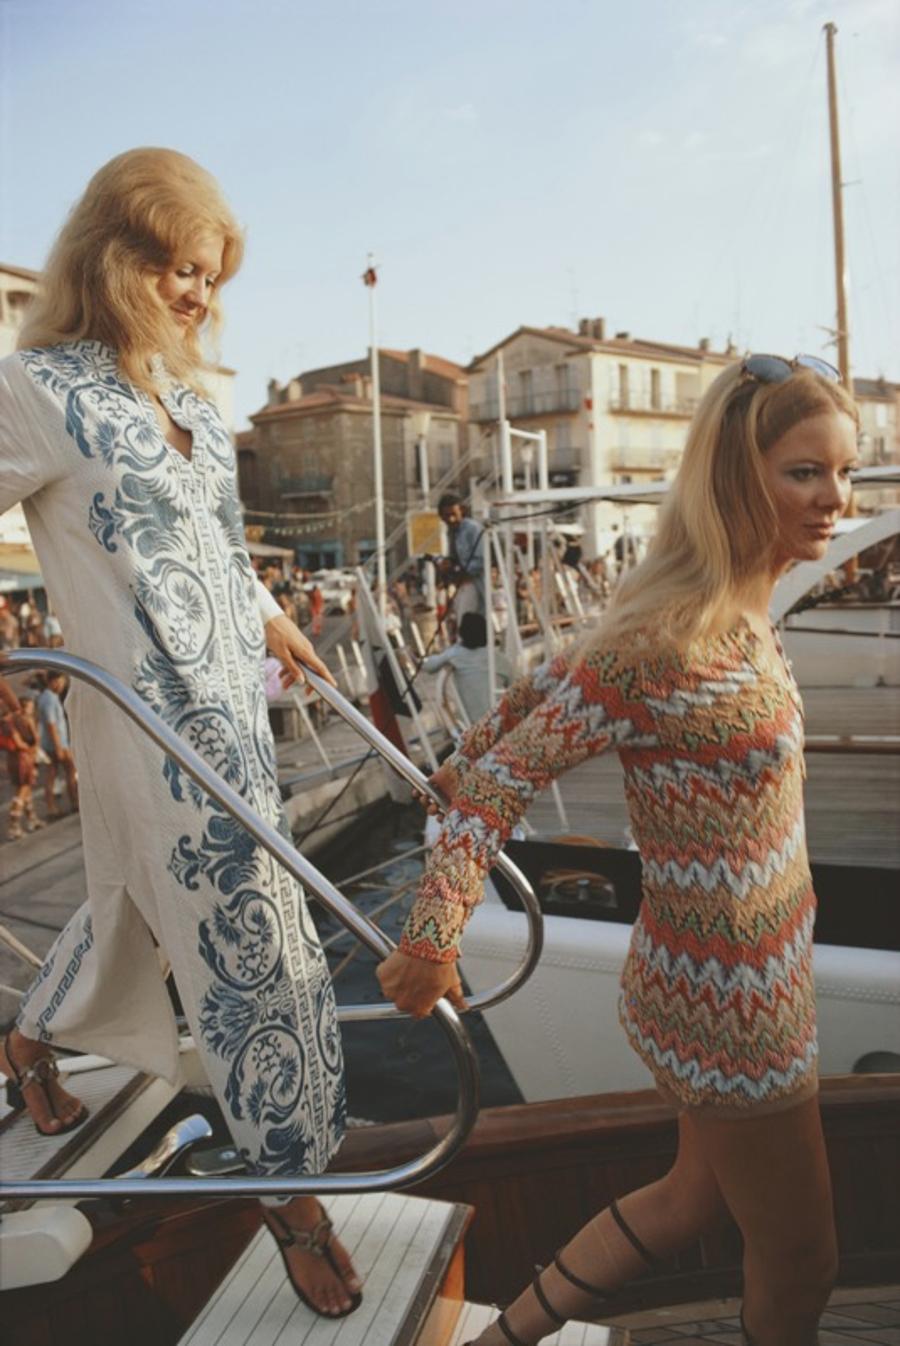 Saint-Tropez 
1971
by Slim Aarons

Slim Aarons Limited Estate Edition

 Two young women, one wearing a kaftan, stepping onto a yacht on the waterfront at Saint-Tropez, France, August 1971. 

unframed
c type print
printed 2023
24 x 20"  - paper